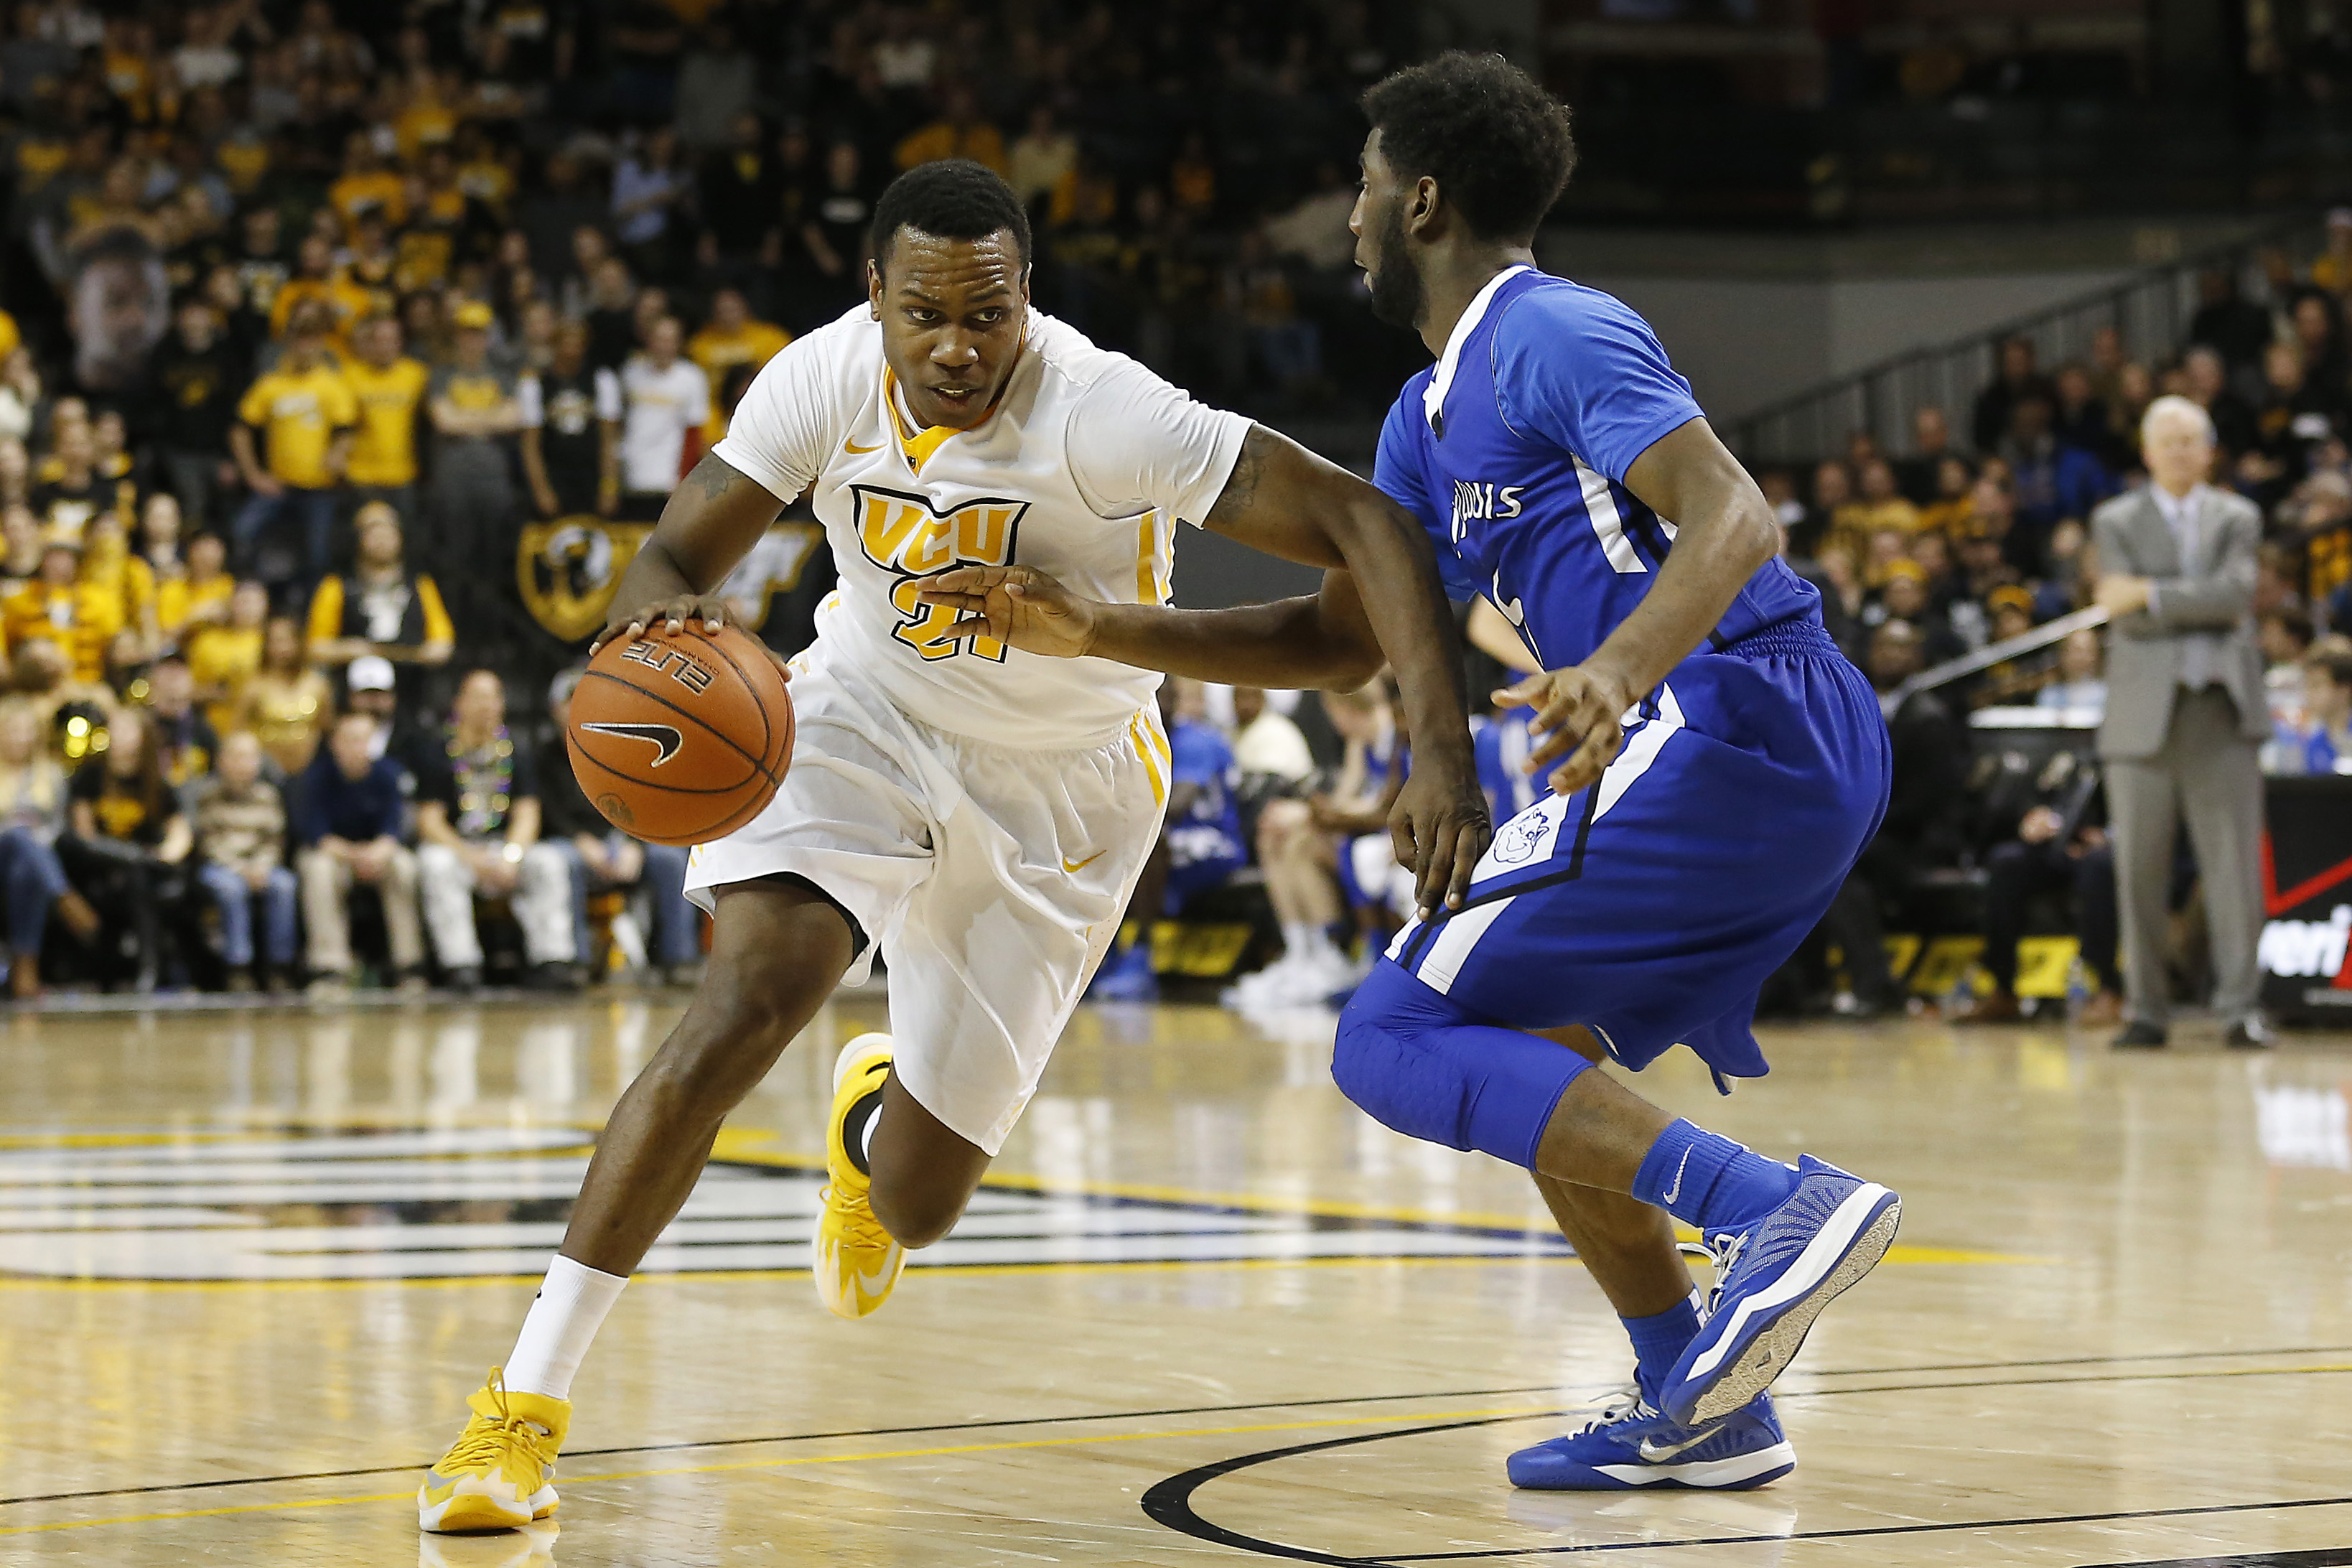 VCU Guard Treveon Graham (#21) scored 16 points in the 74-54 victory against the Saint Louis Billikens on Tuesday, Feb. 17th, 2015